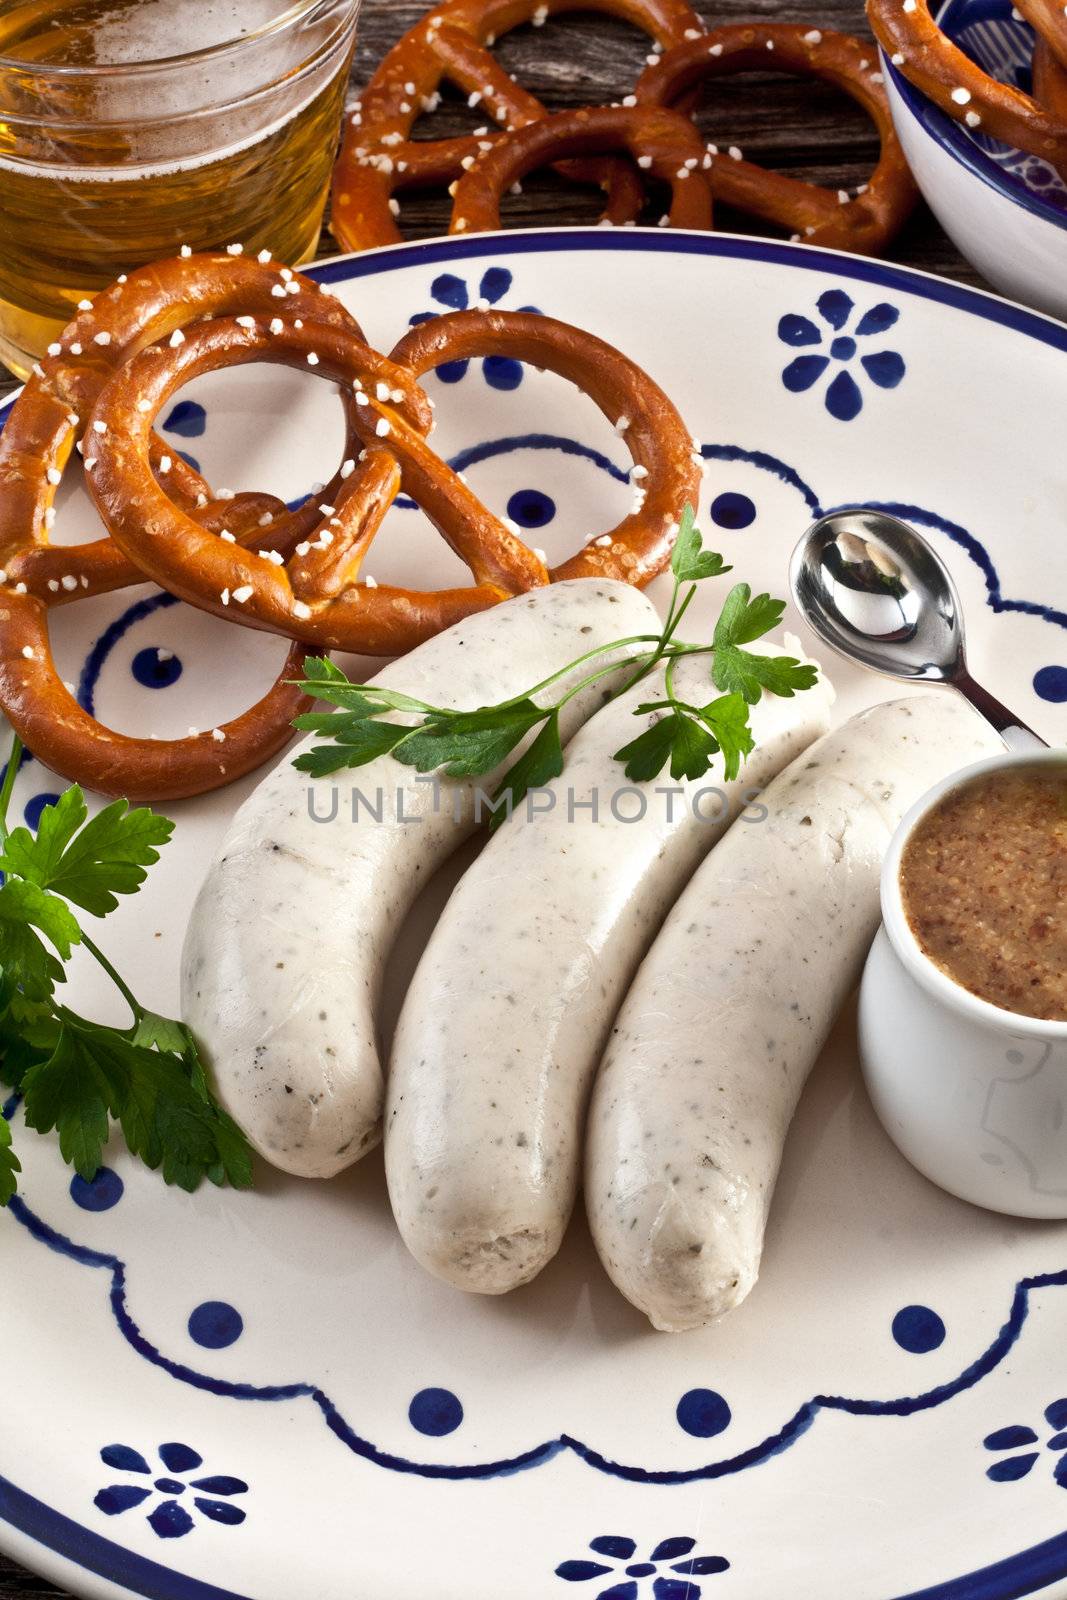 weisswurst with sweet bavarian mustard and pretzels